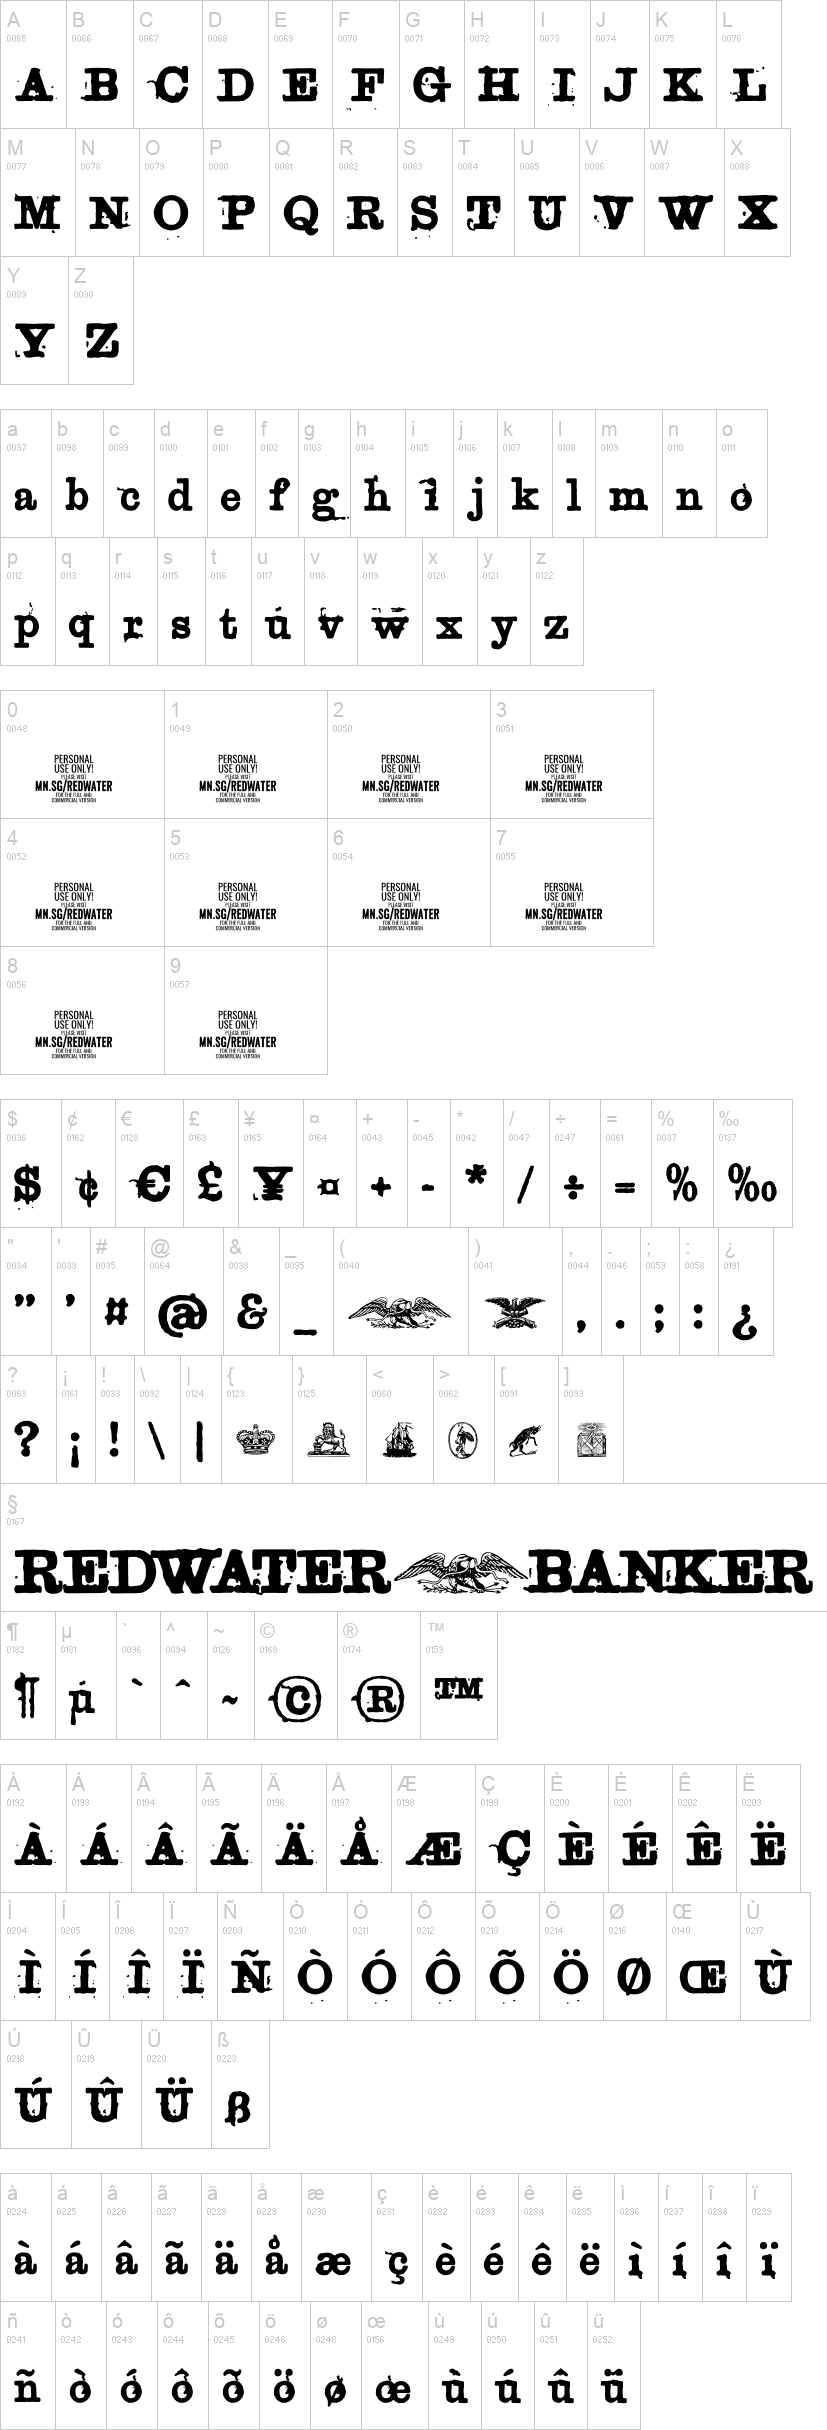 Redwater Banker